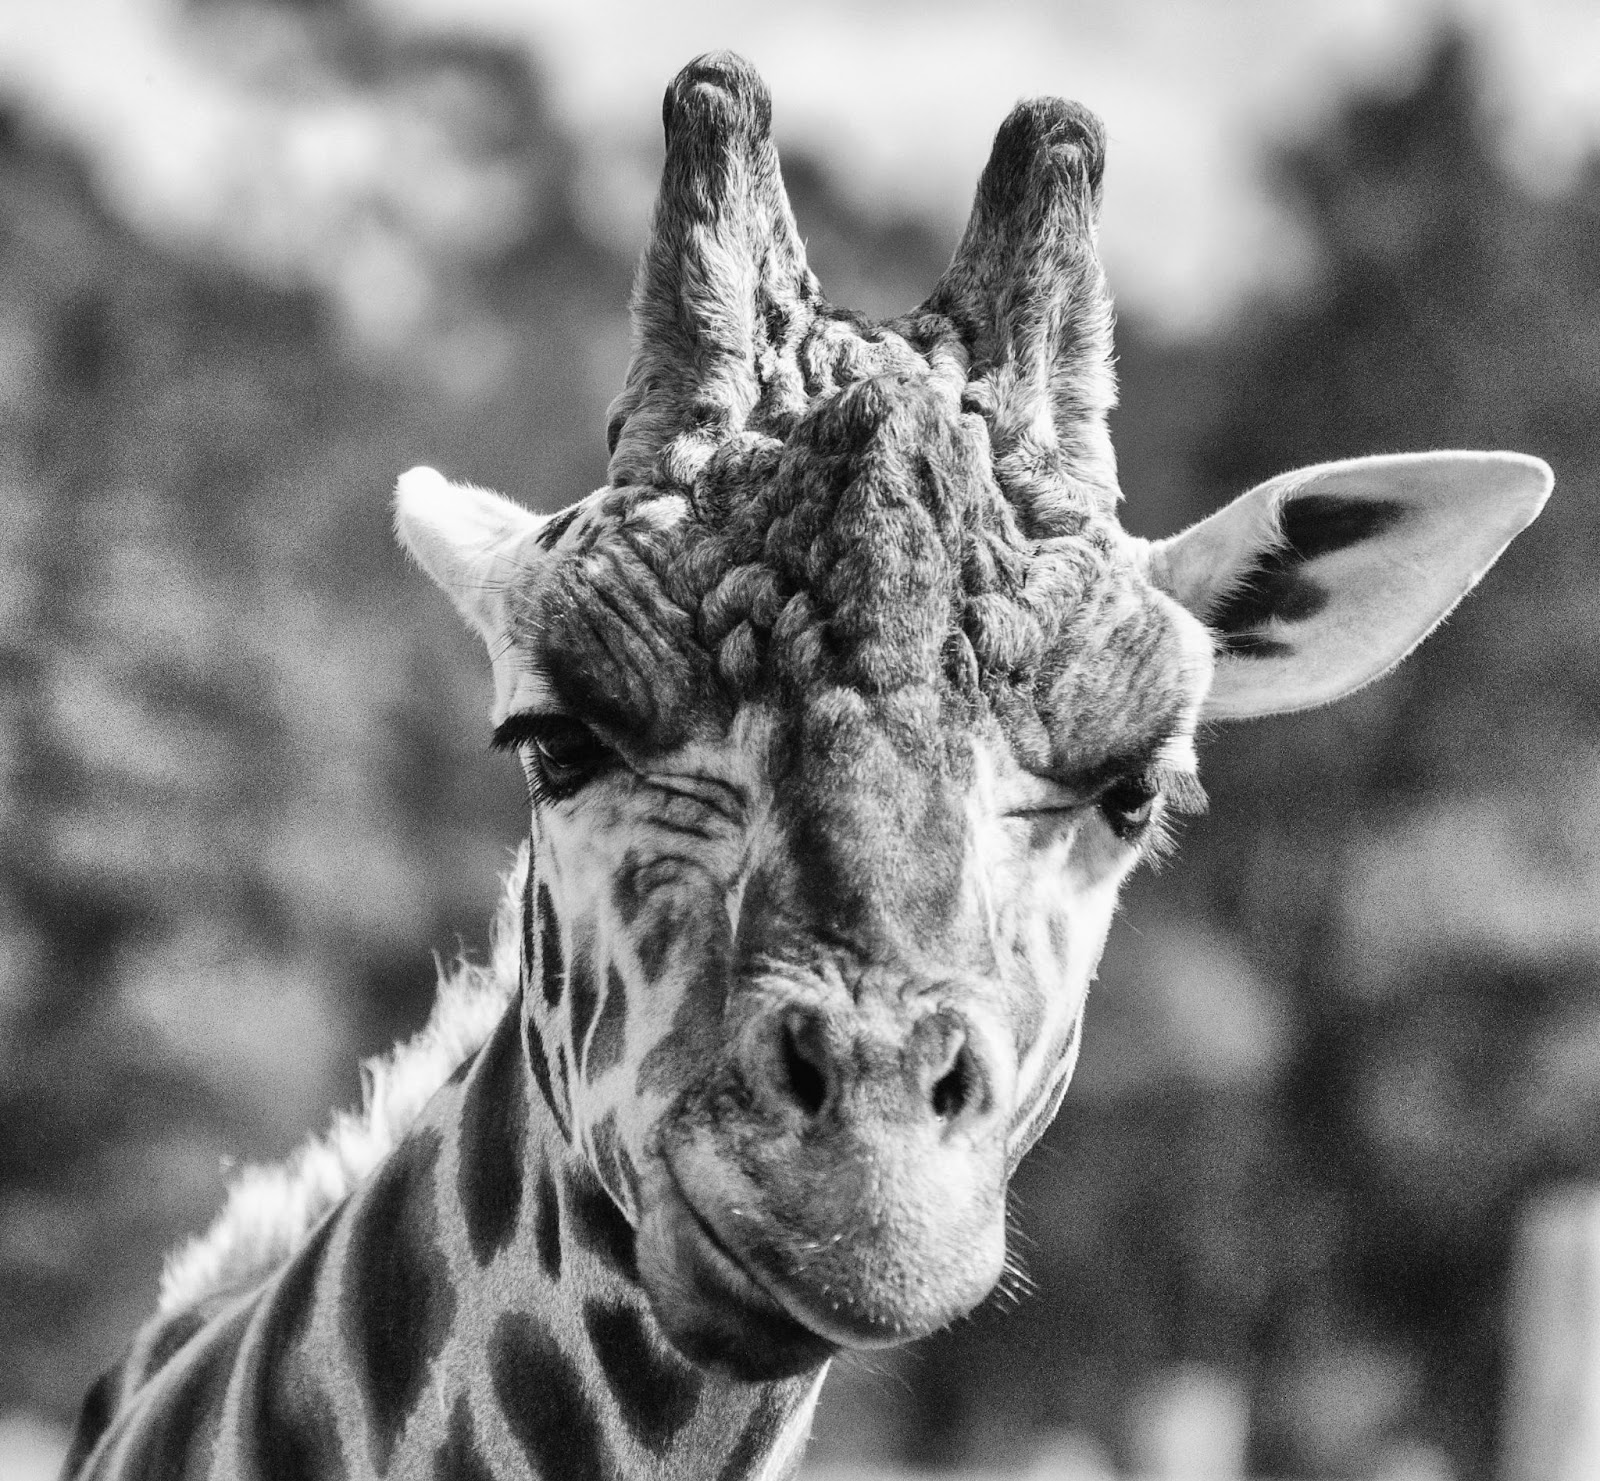 A black and white photo of a giraffe with a quizzical look on its face.